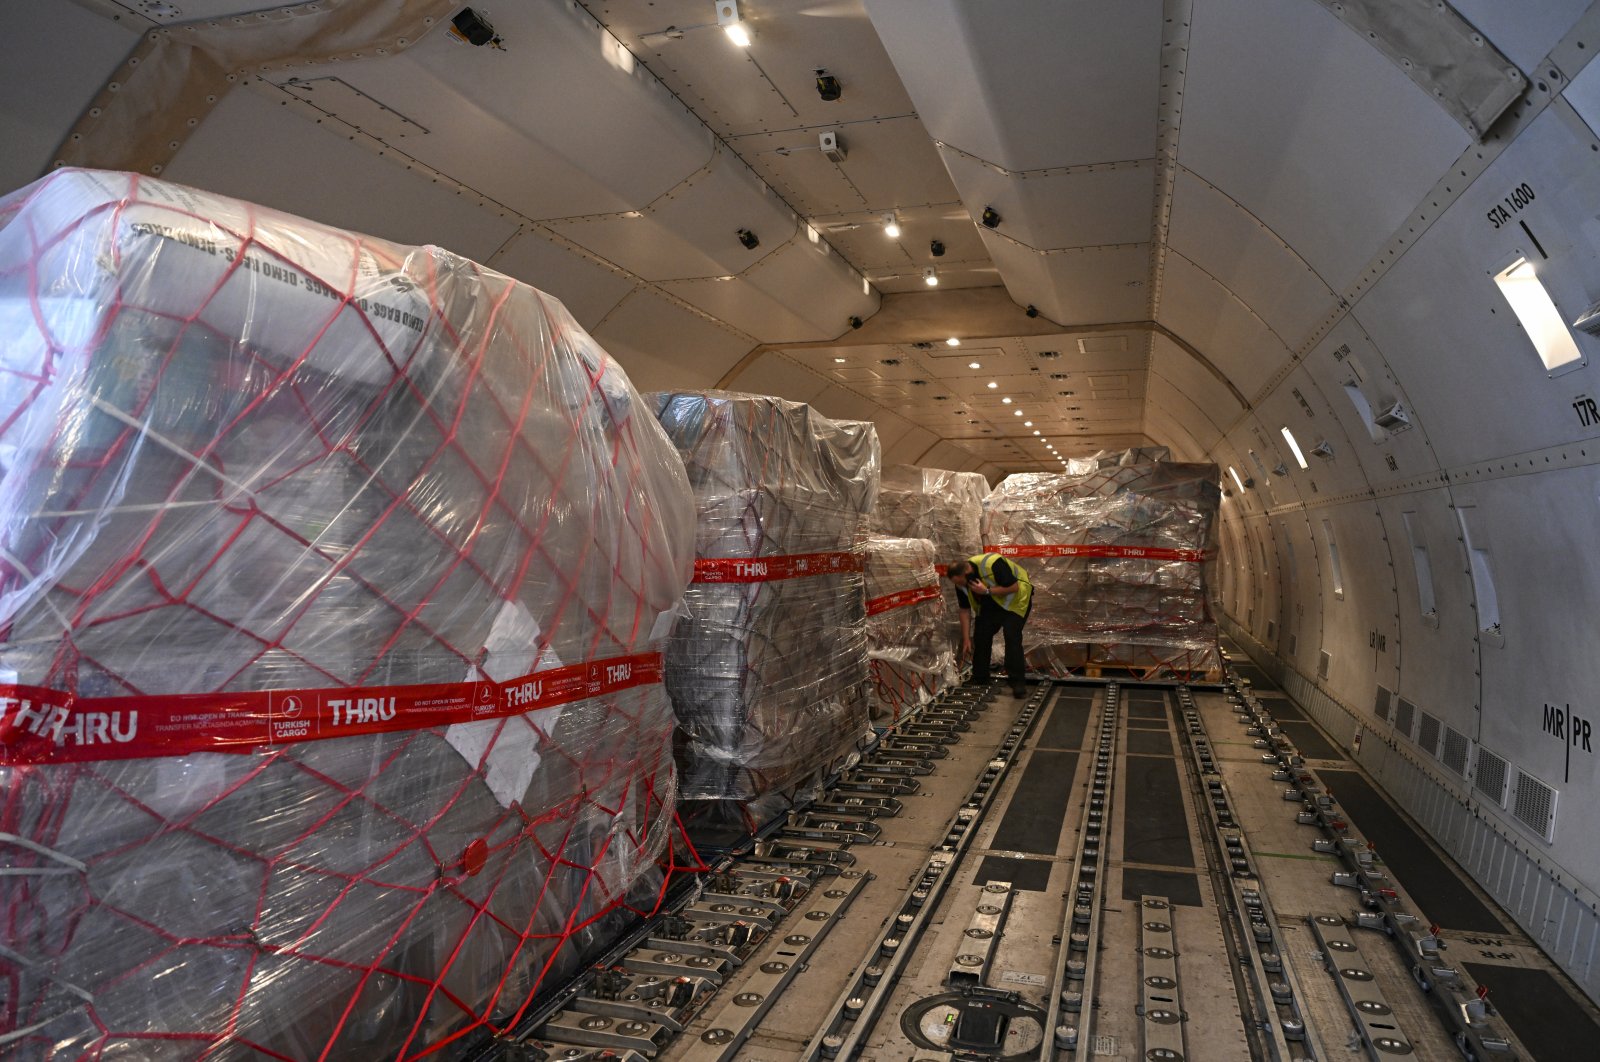 Aid collected in Washington being loaded onto plane at Washington Dulles airport, Feb. 17, 2023. (AA Photo)